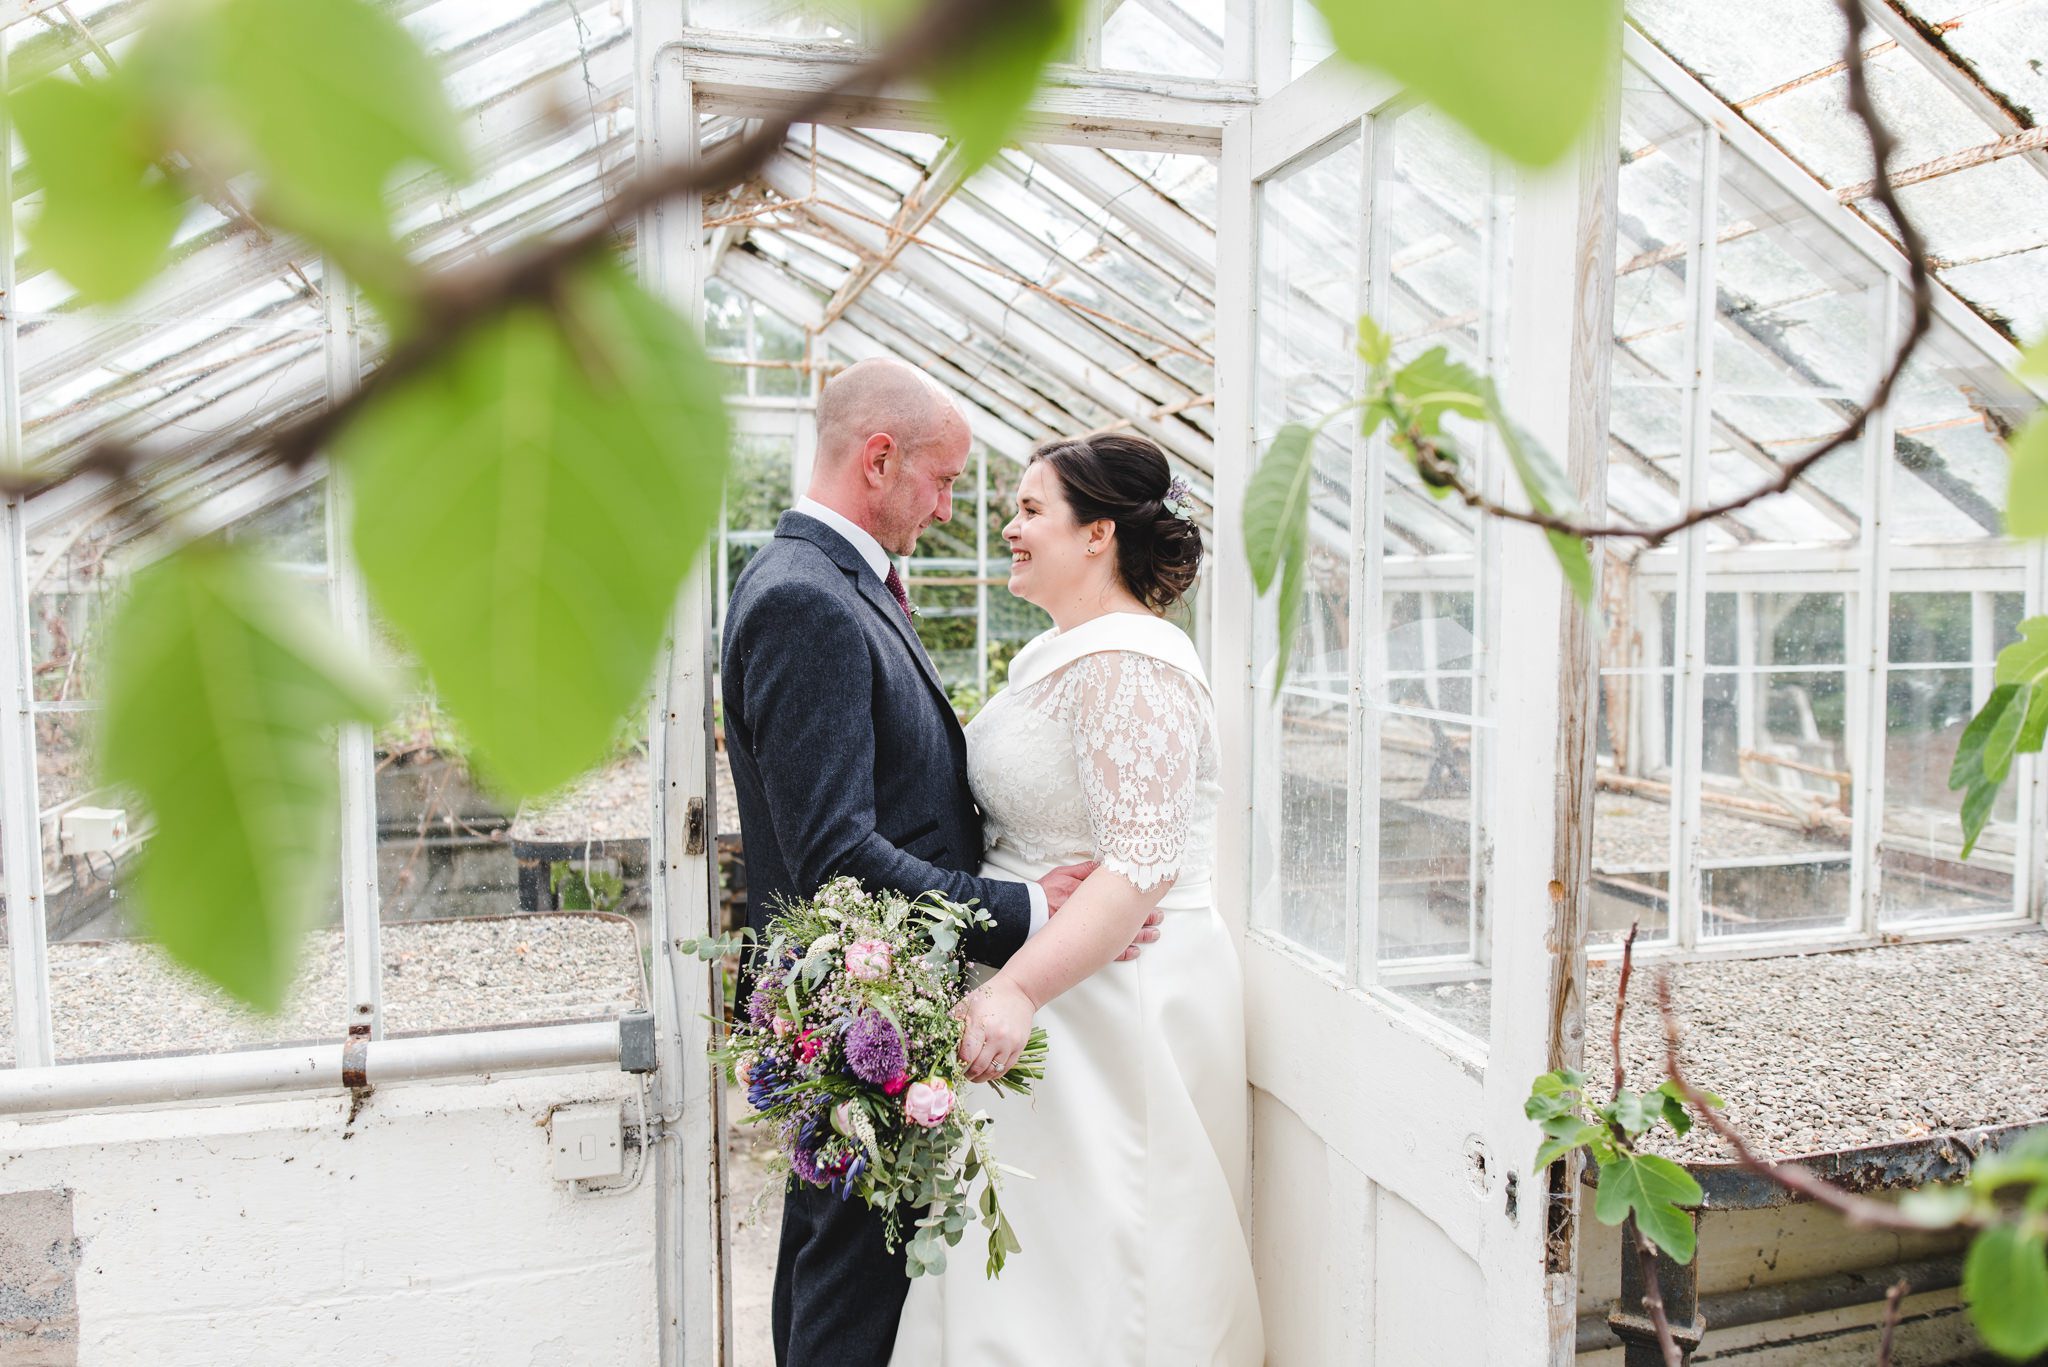 A couple in a greenhouse standing opposite each other